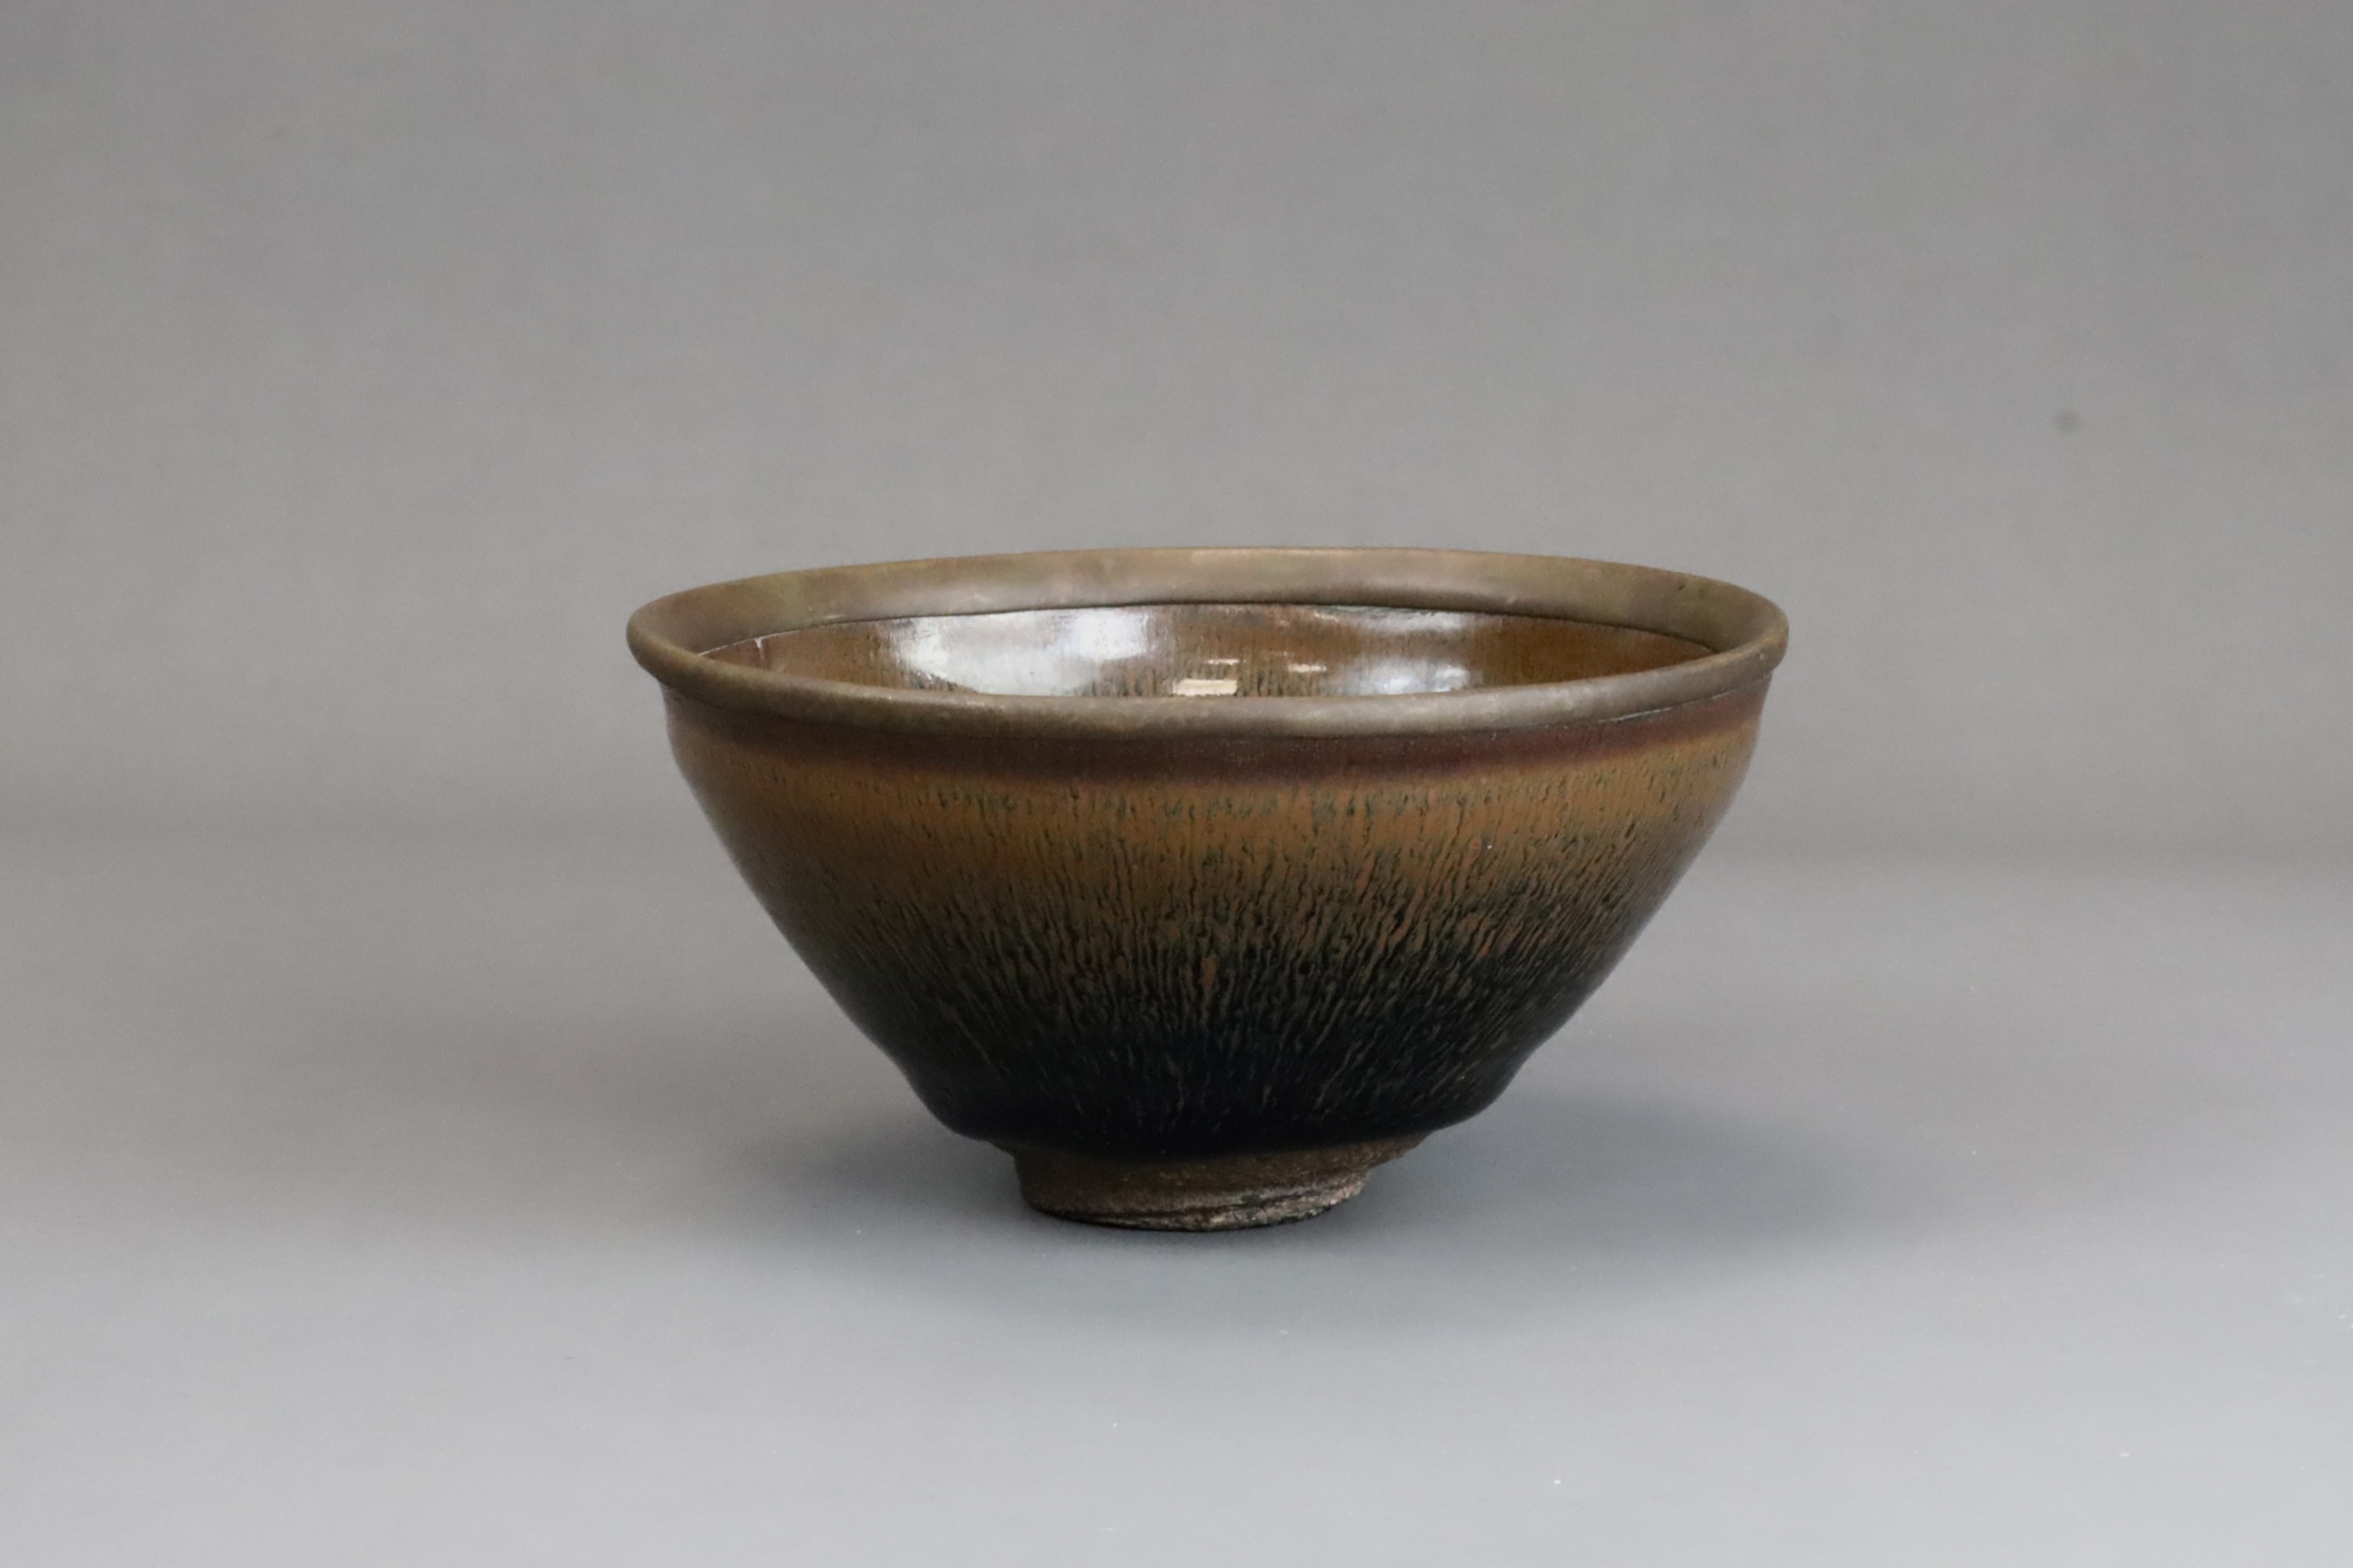 A Jian ware 'Hare's fur' Bowl, Song dynasty - Image 3 of 10